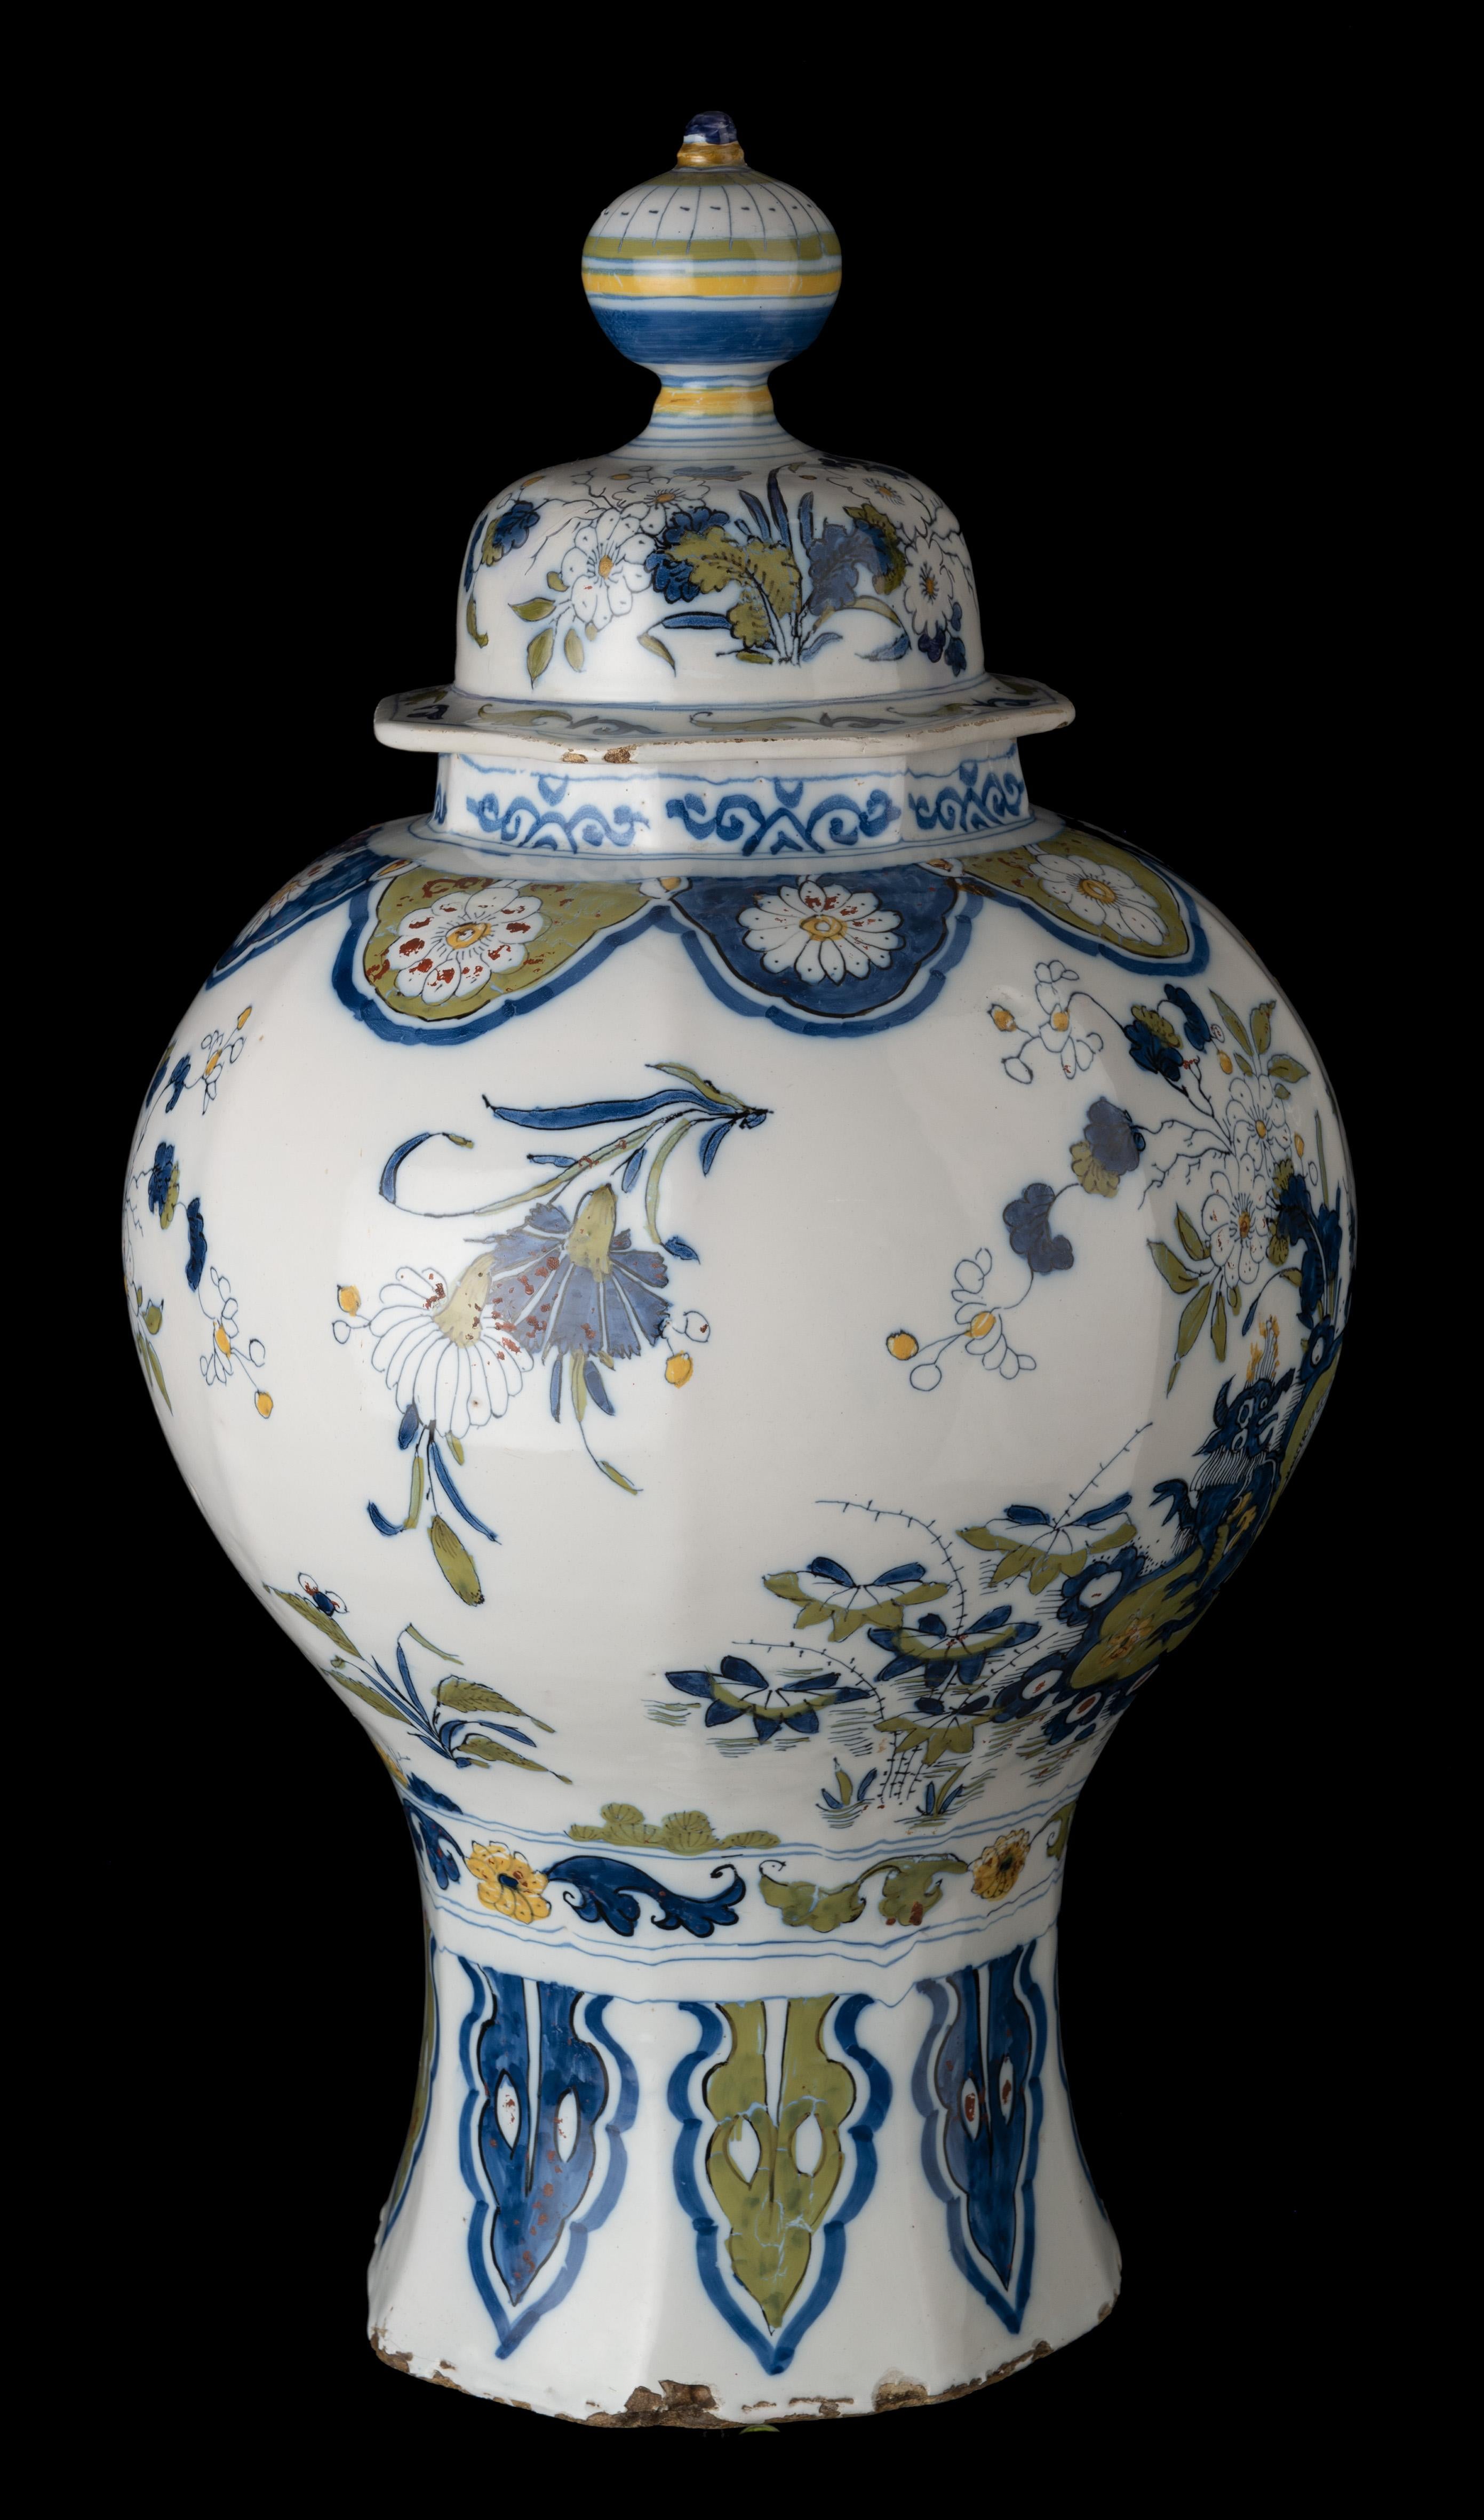 Baroque Delft Polychrome Covered Jar with Peacock and Dragon in Landscape, 1690-1700 For Sale